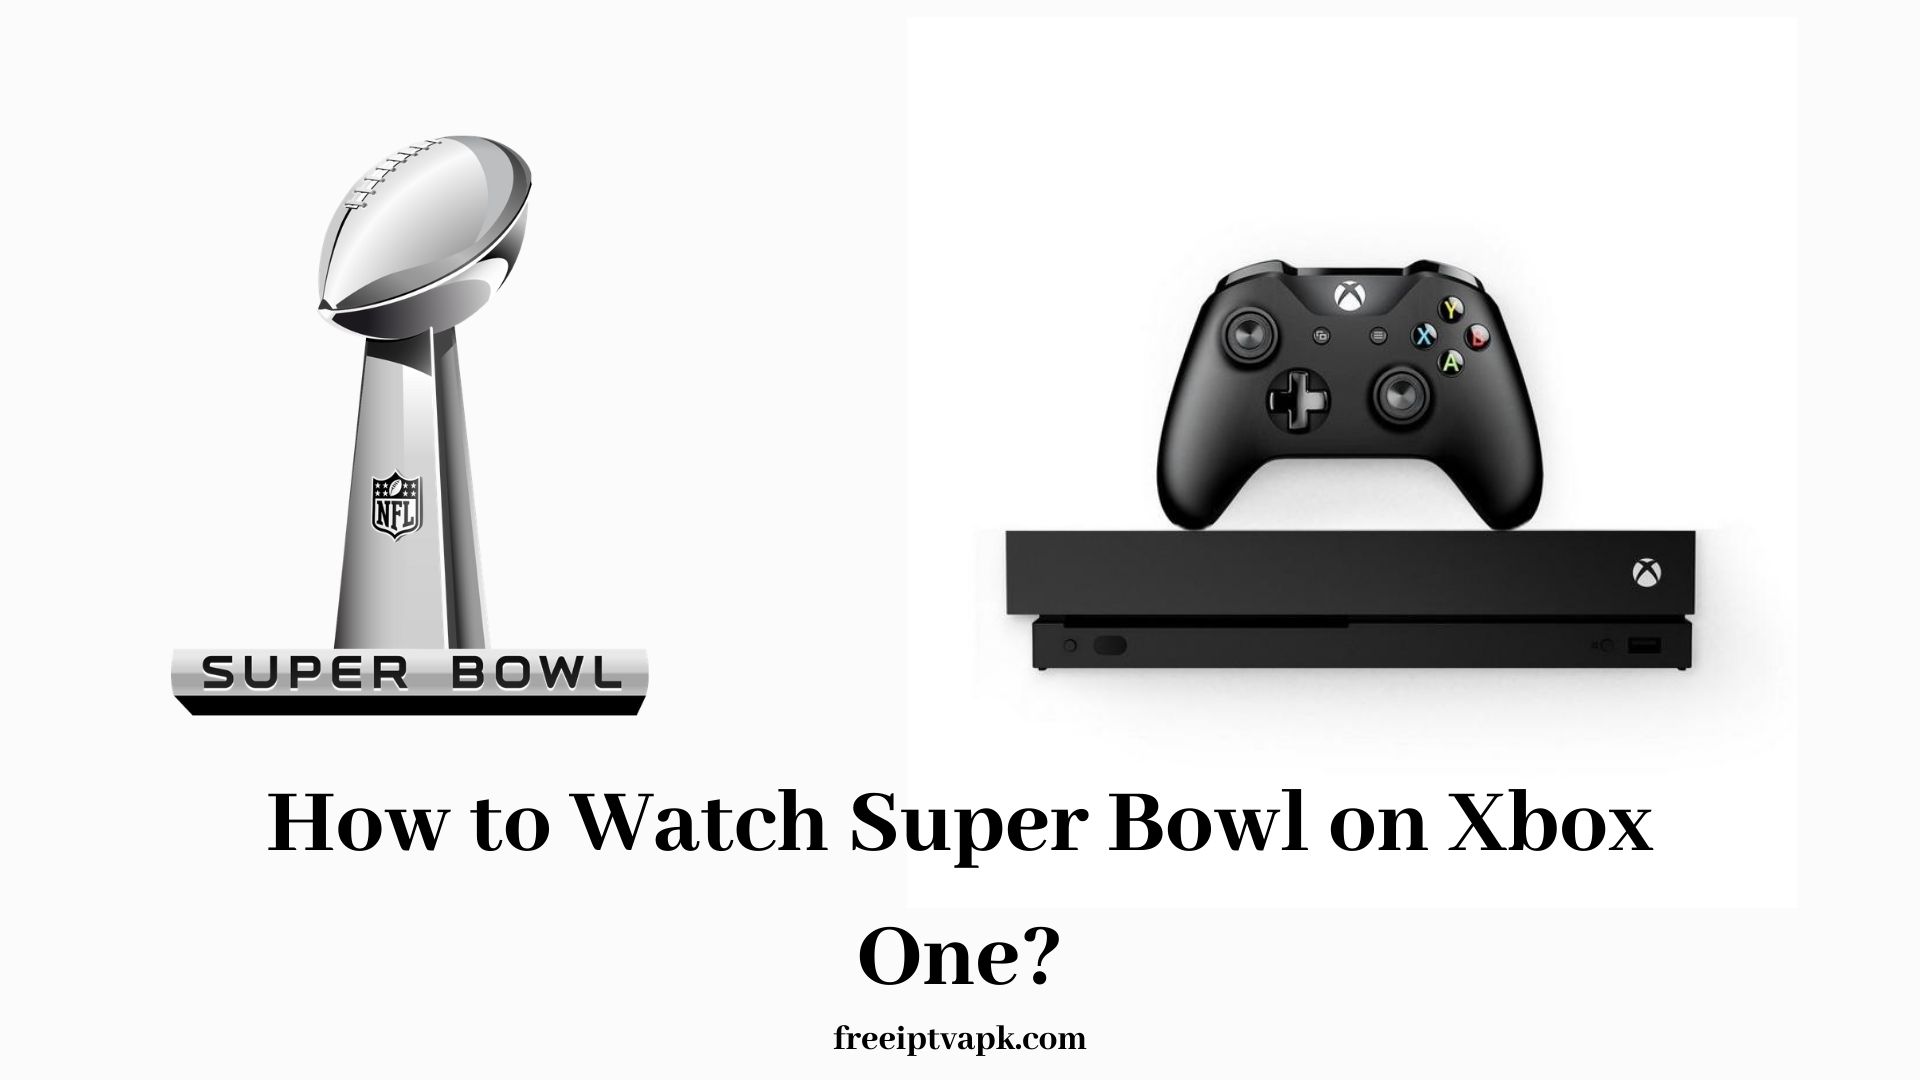 Super Bowl on Xbox One